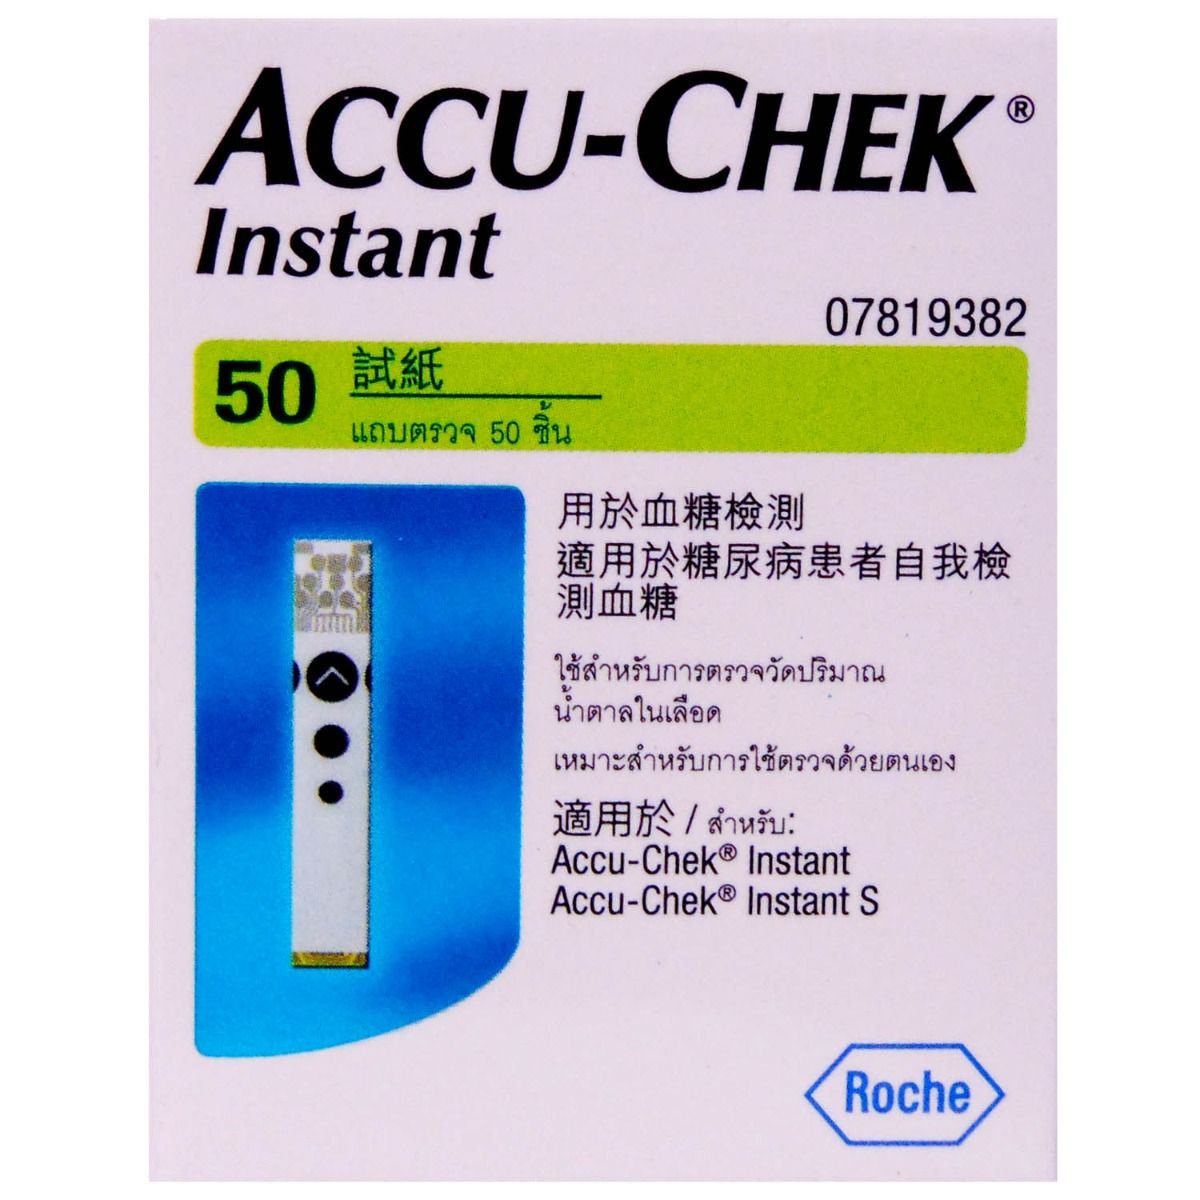 Accu-Chek Instant Test Strips, 50 Count, Pack of 1 